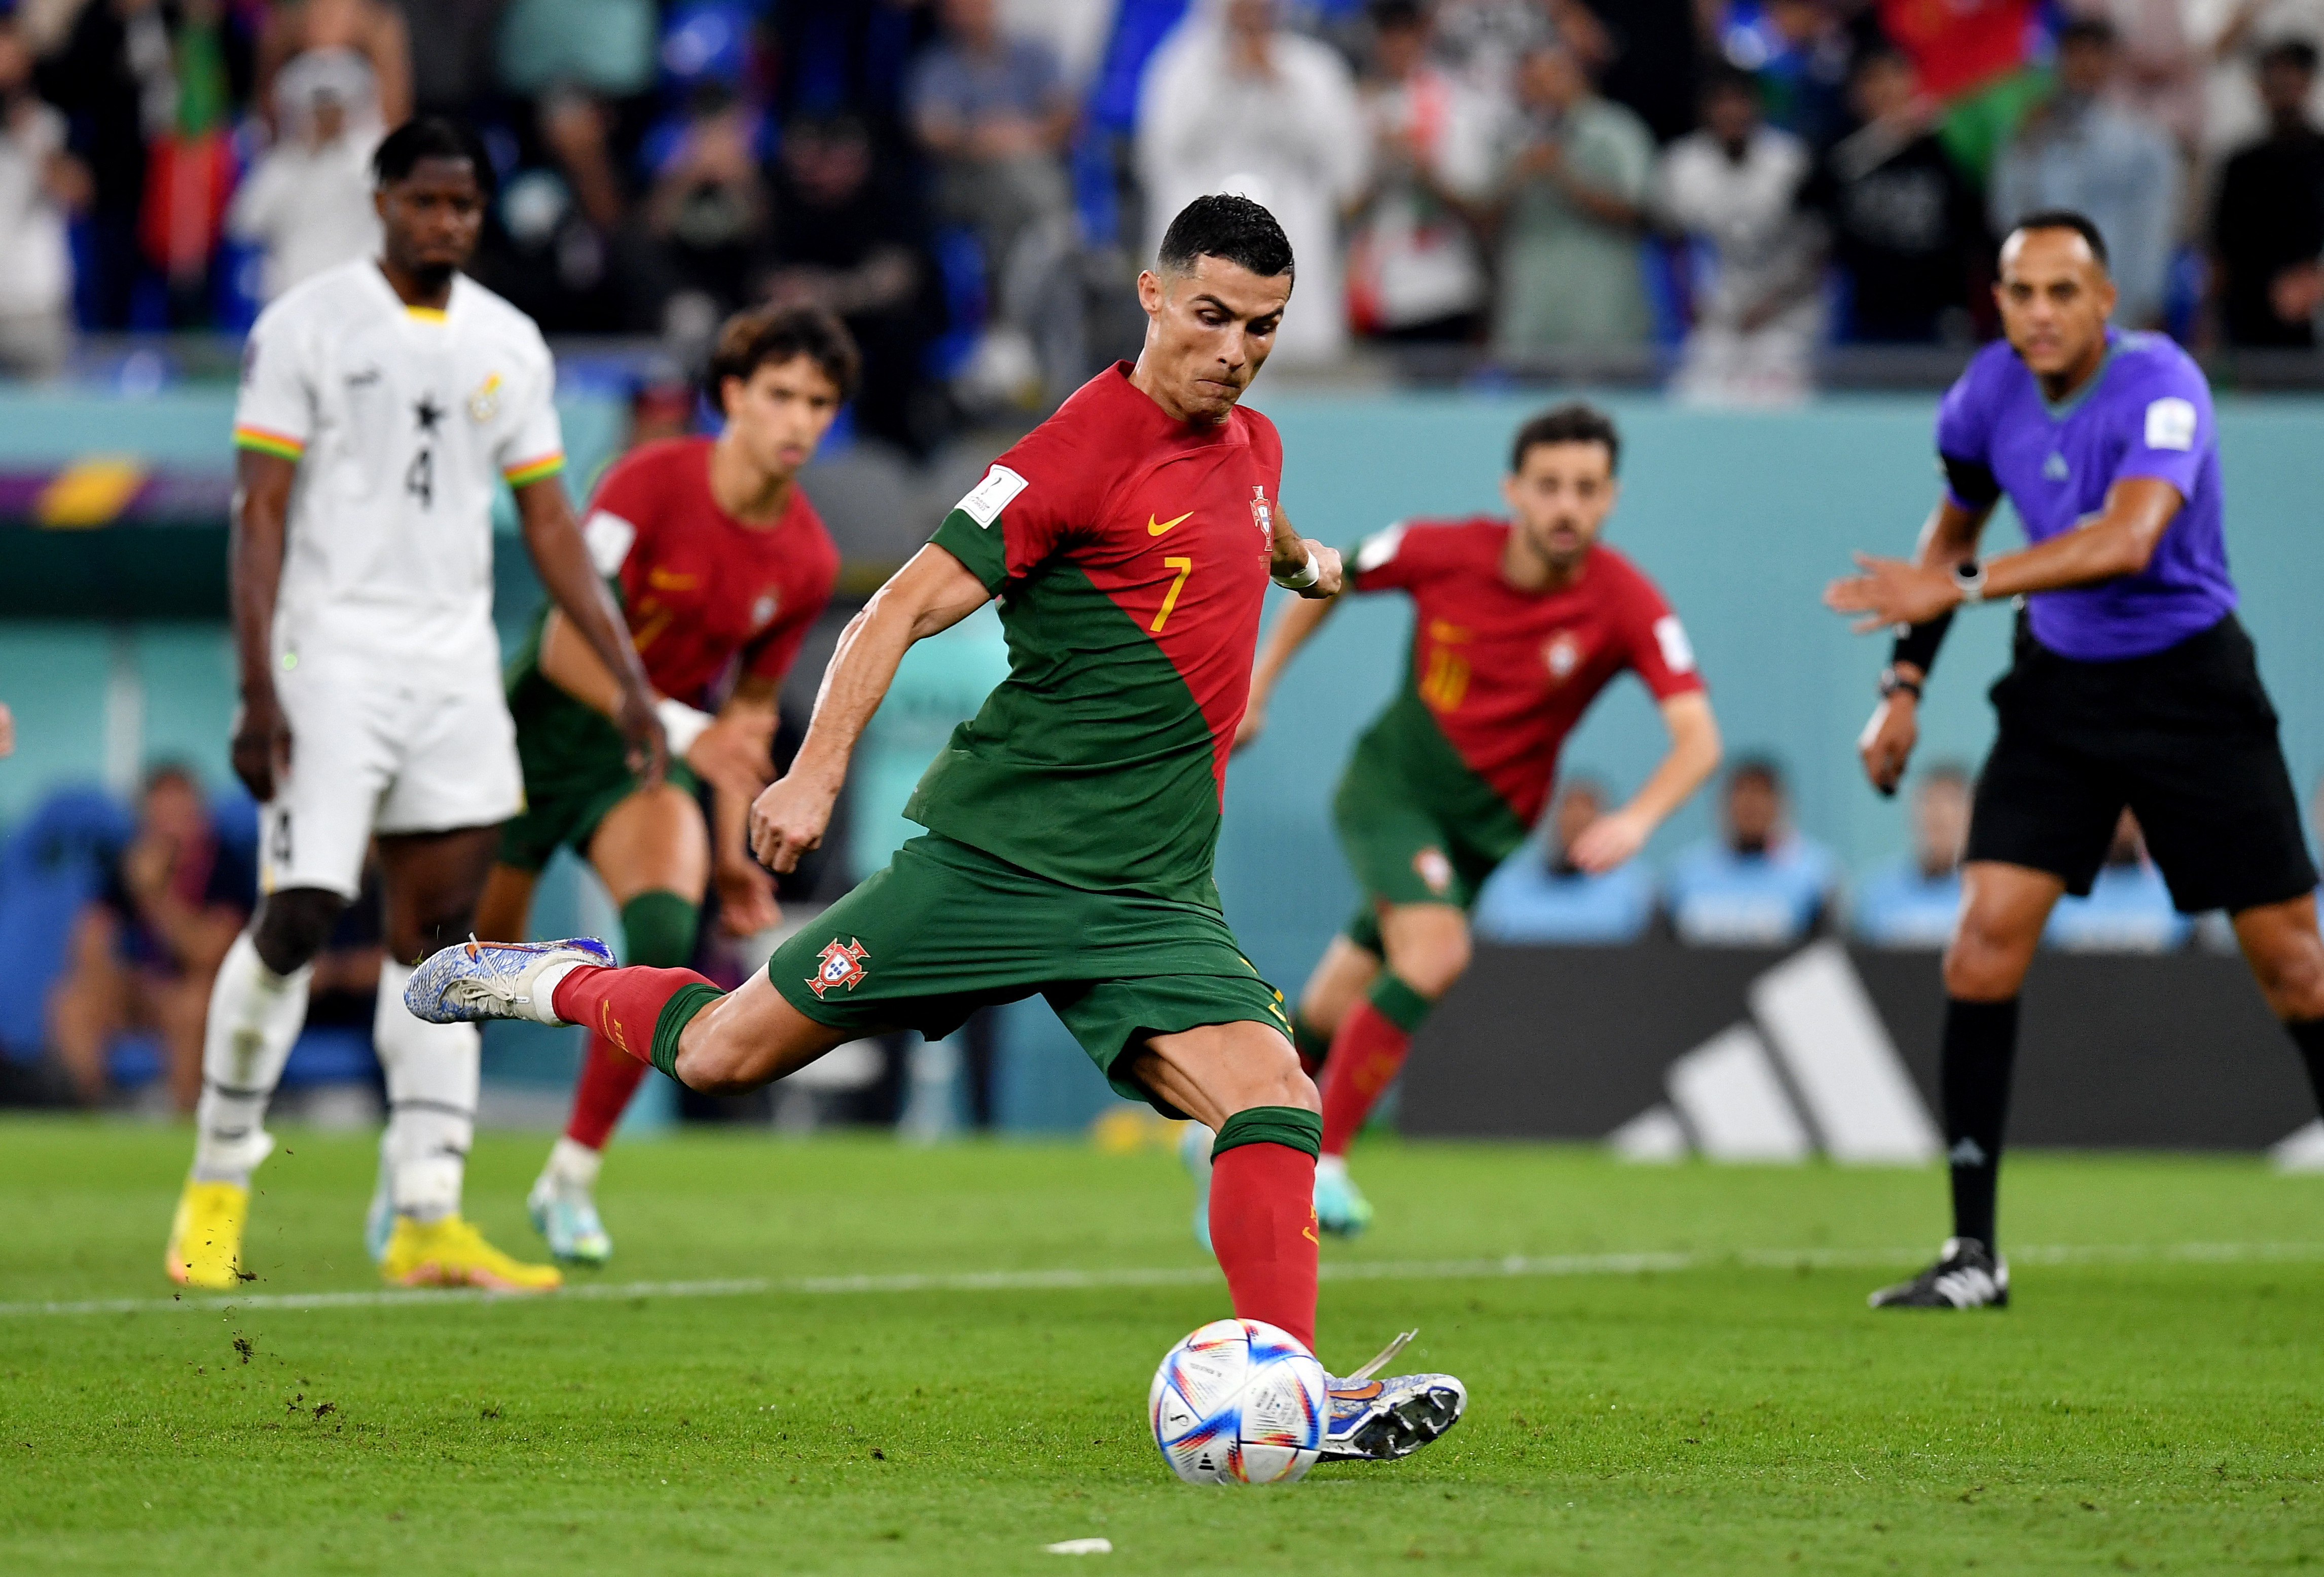 Portugal's Ronaldo is first player to score in five World Cups after goal v Ghana